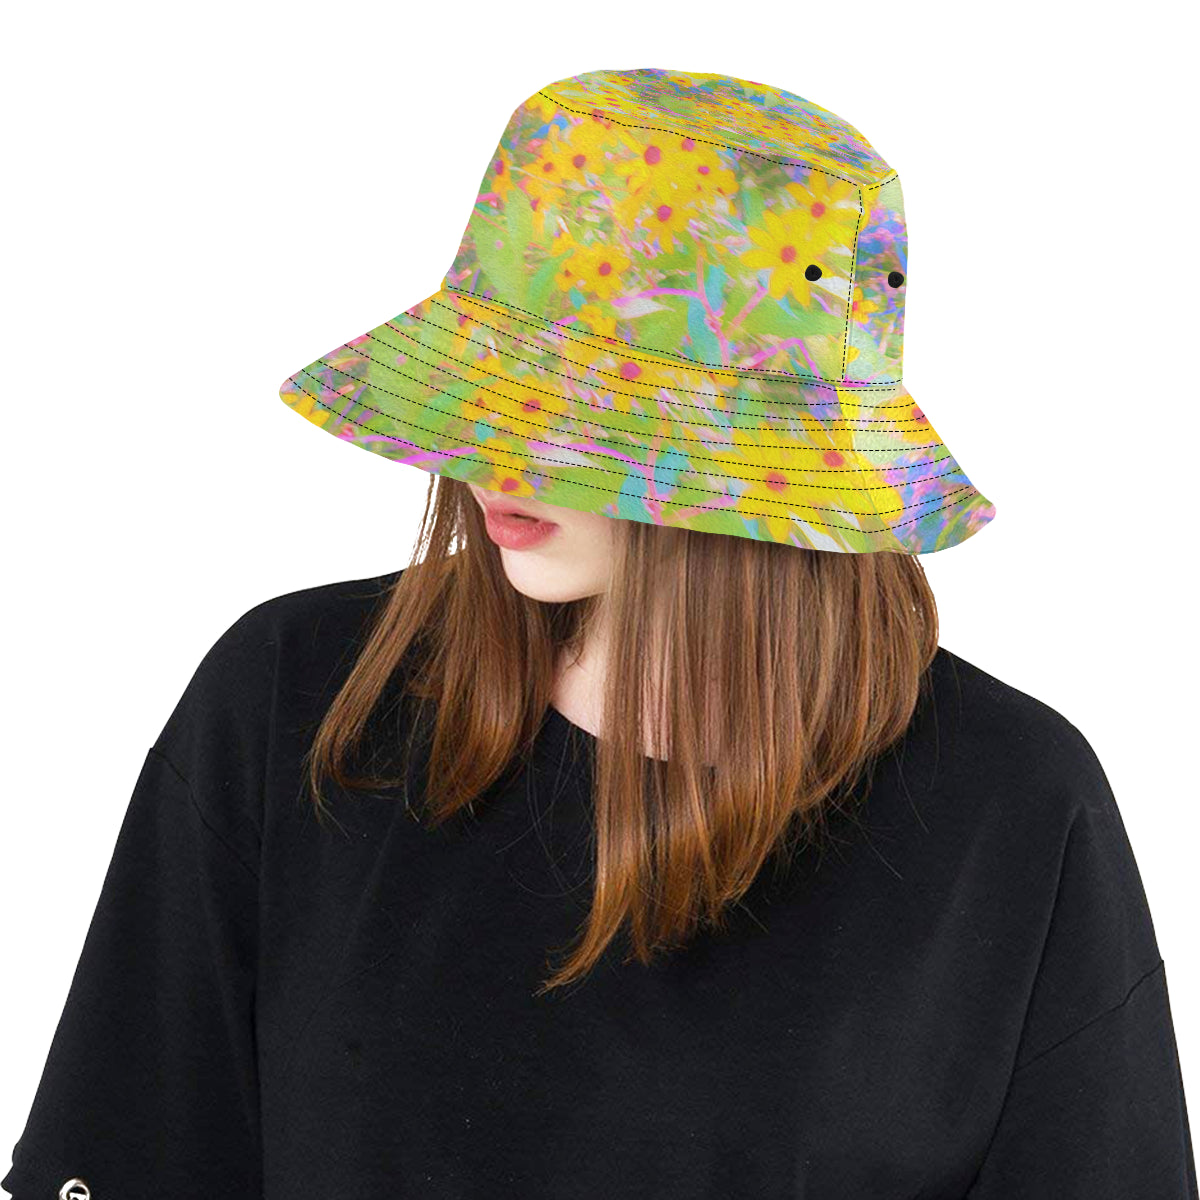 Bucket Hat, Pretty Yellow and Red Flowers with Turquoise, Colorful Hat for Women